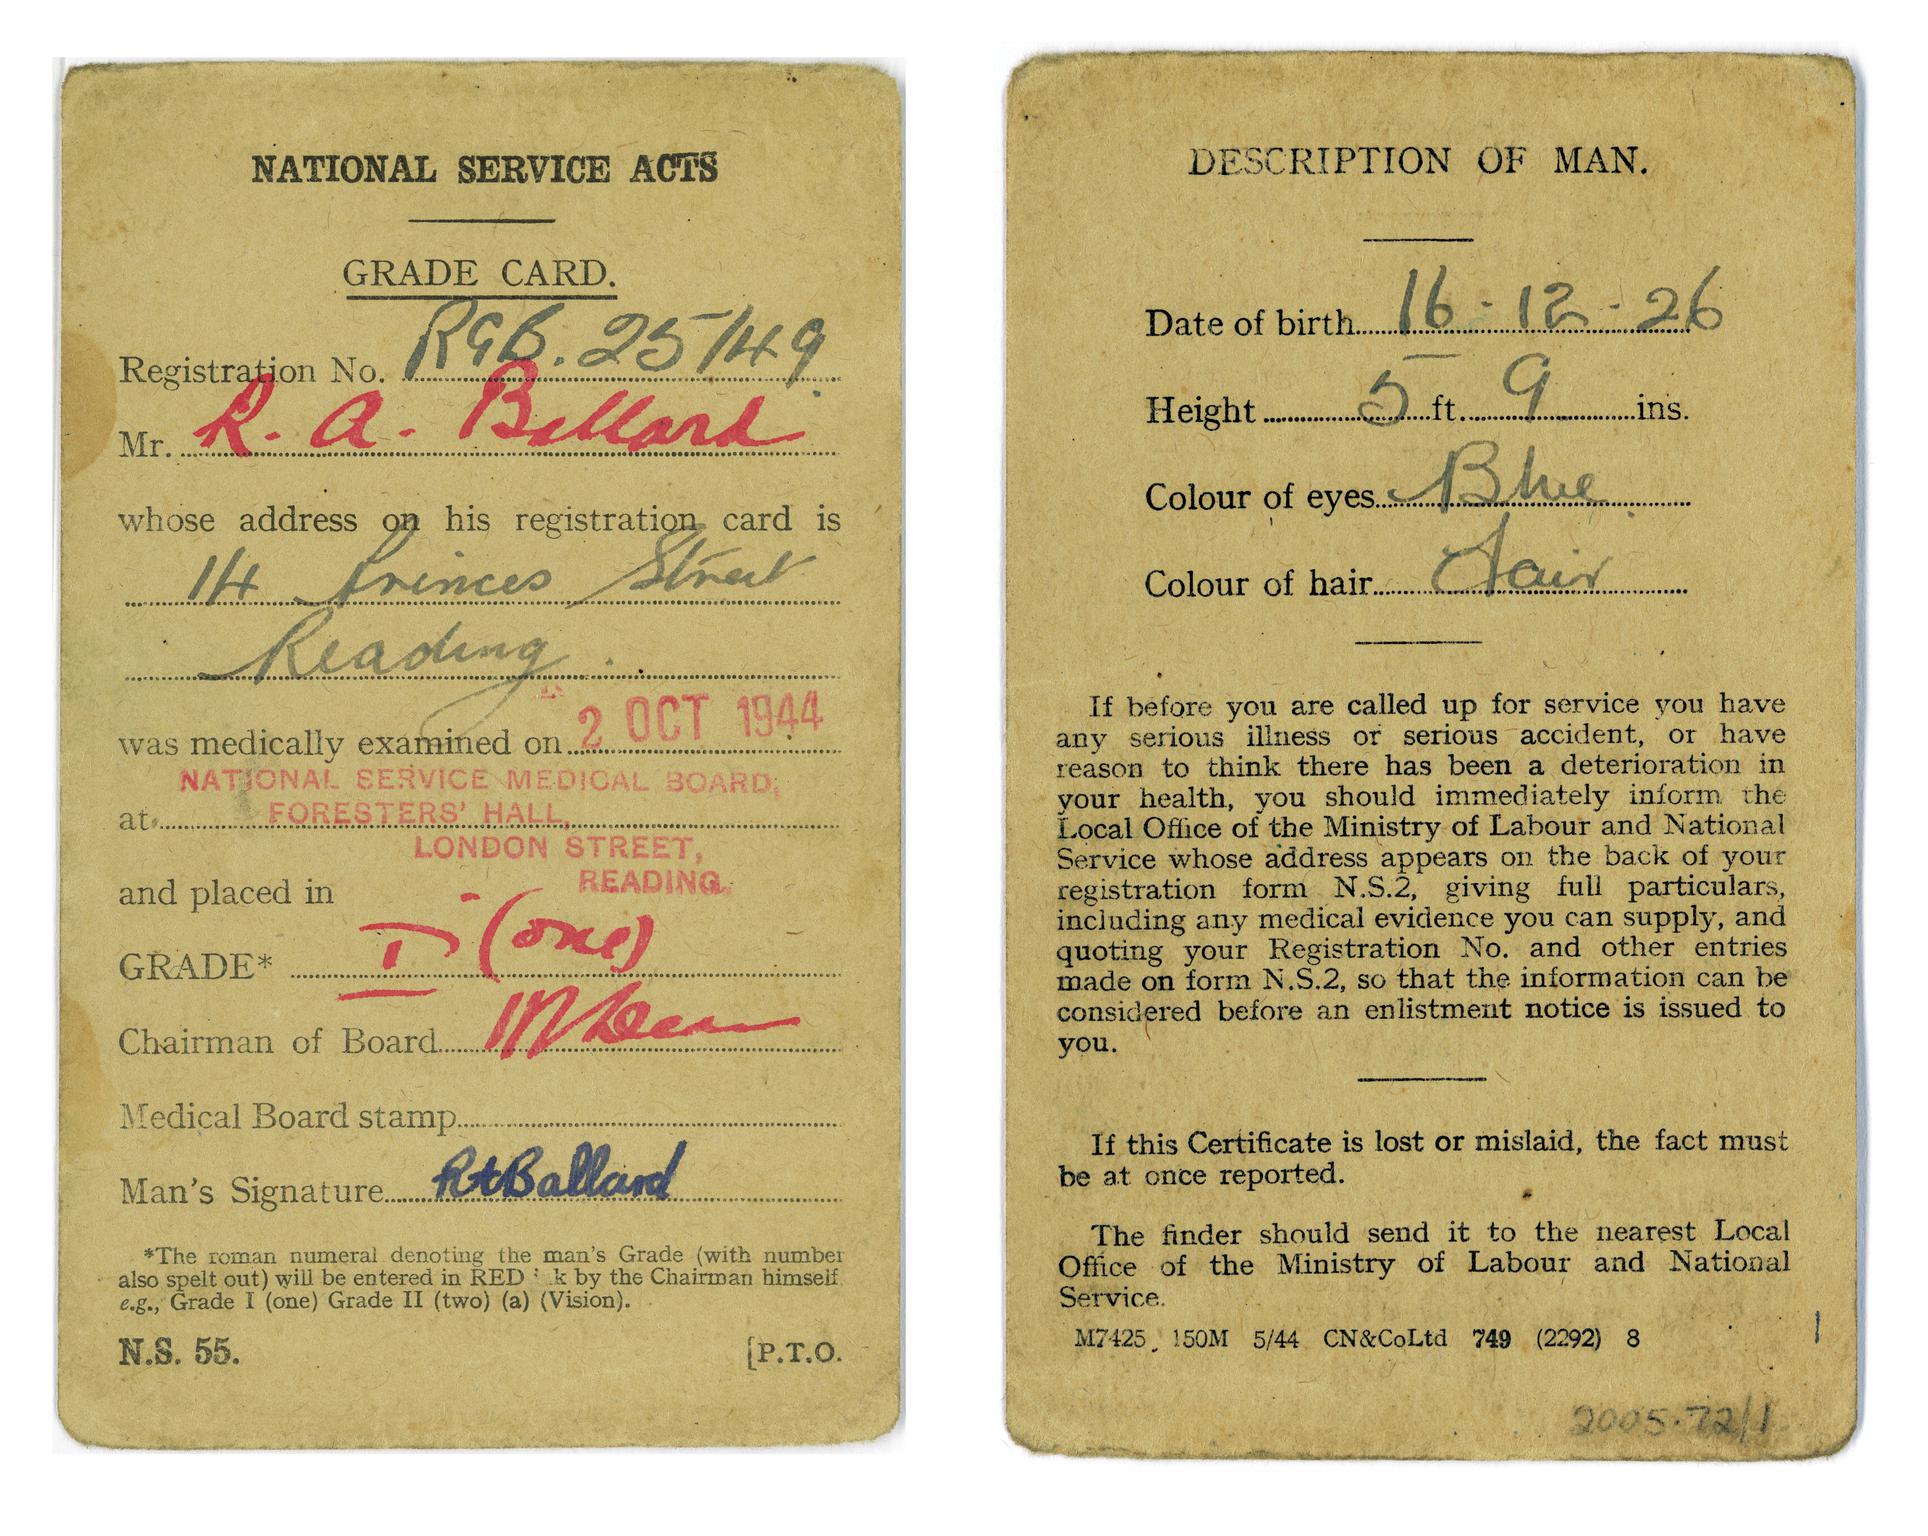 National Service Acts Grade Card